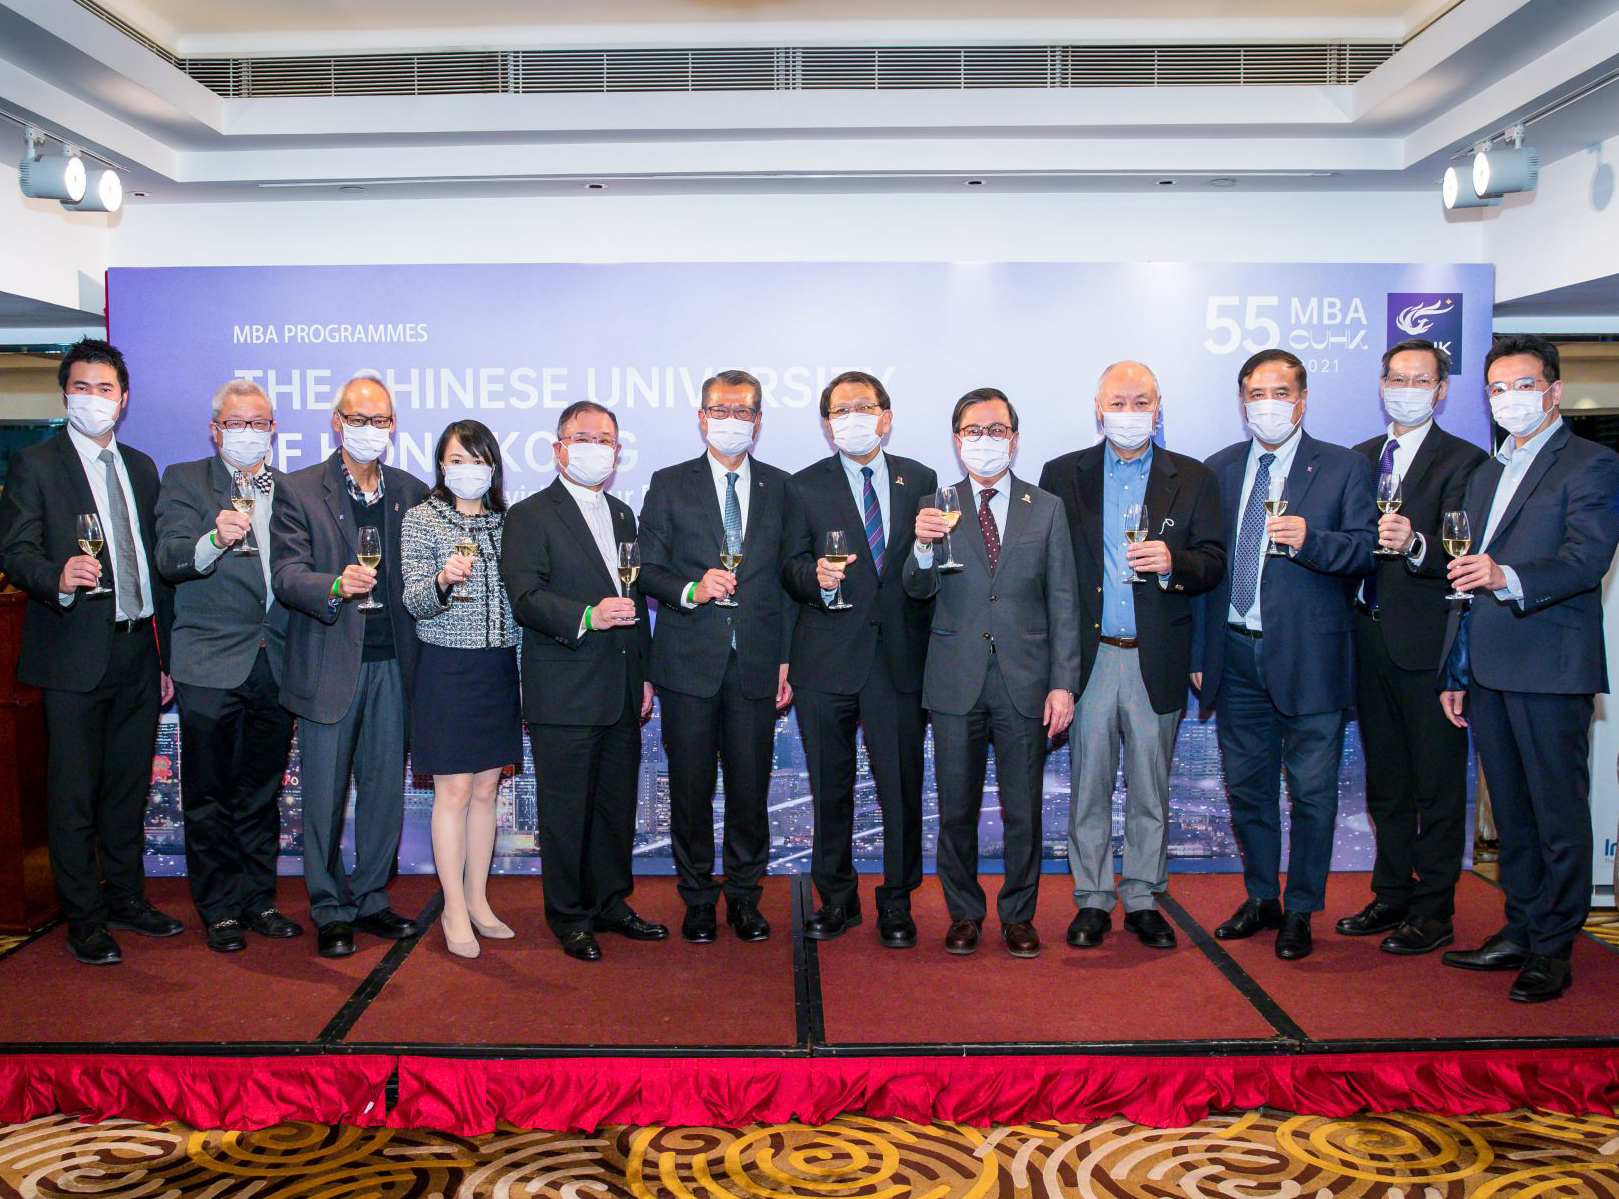 Officiating guests made a toast during the event